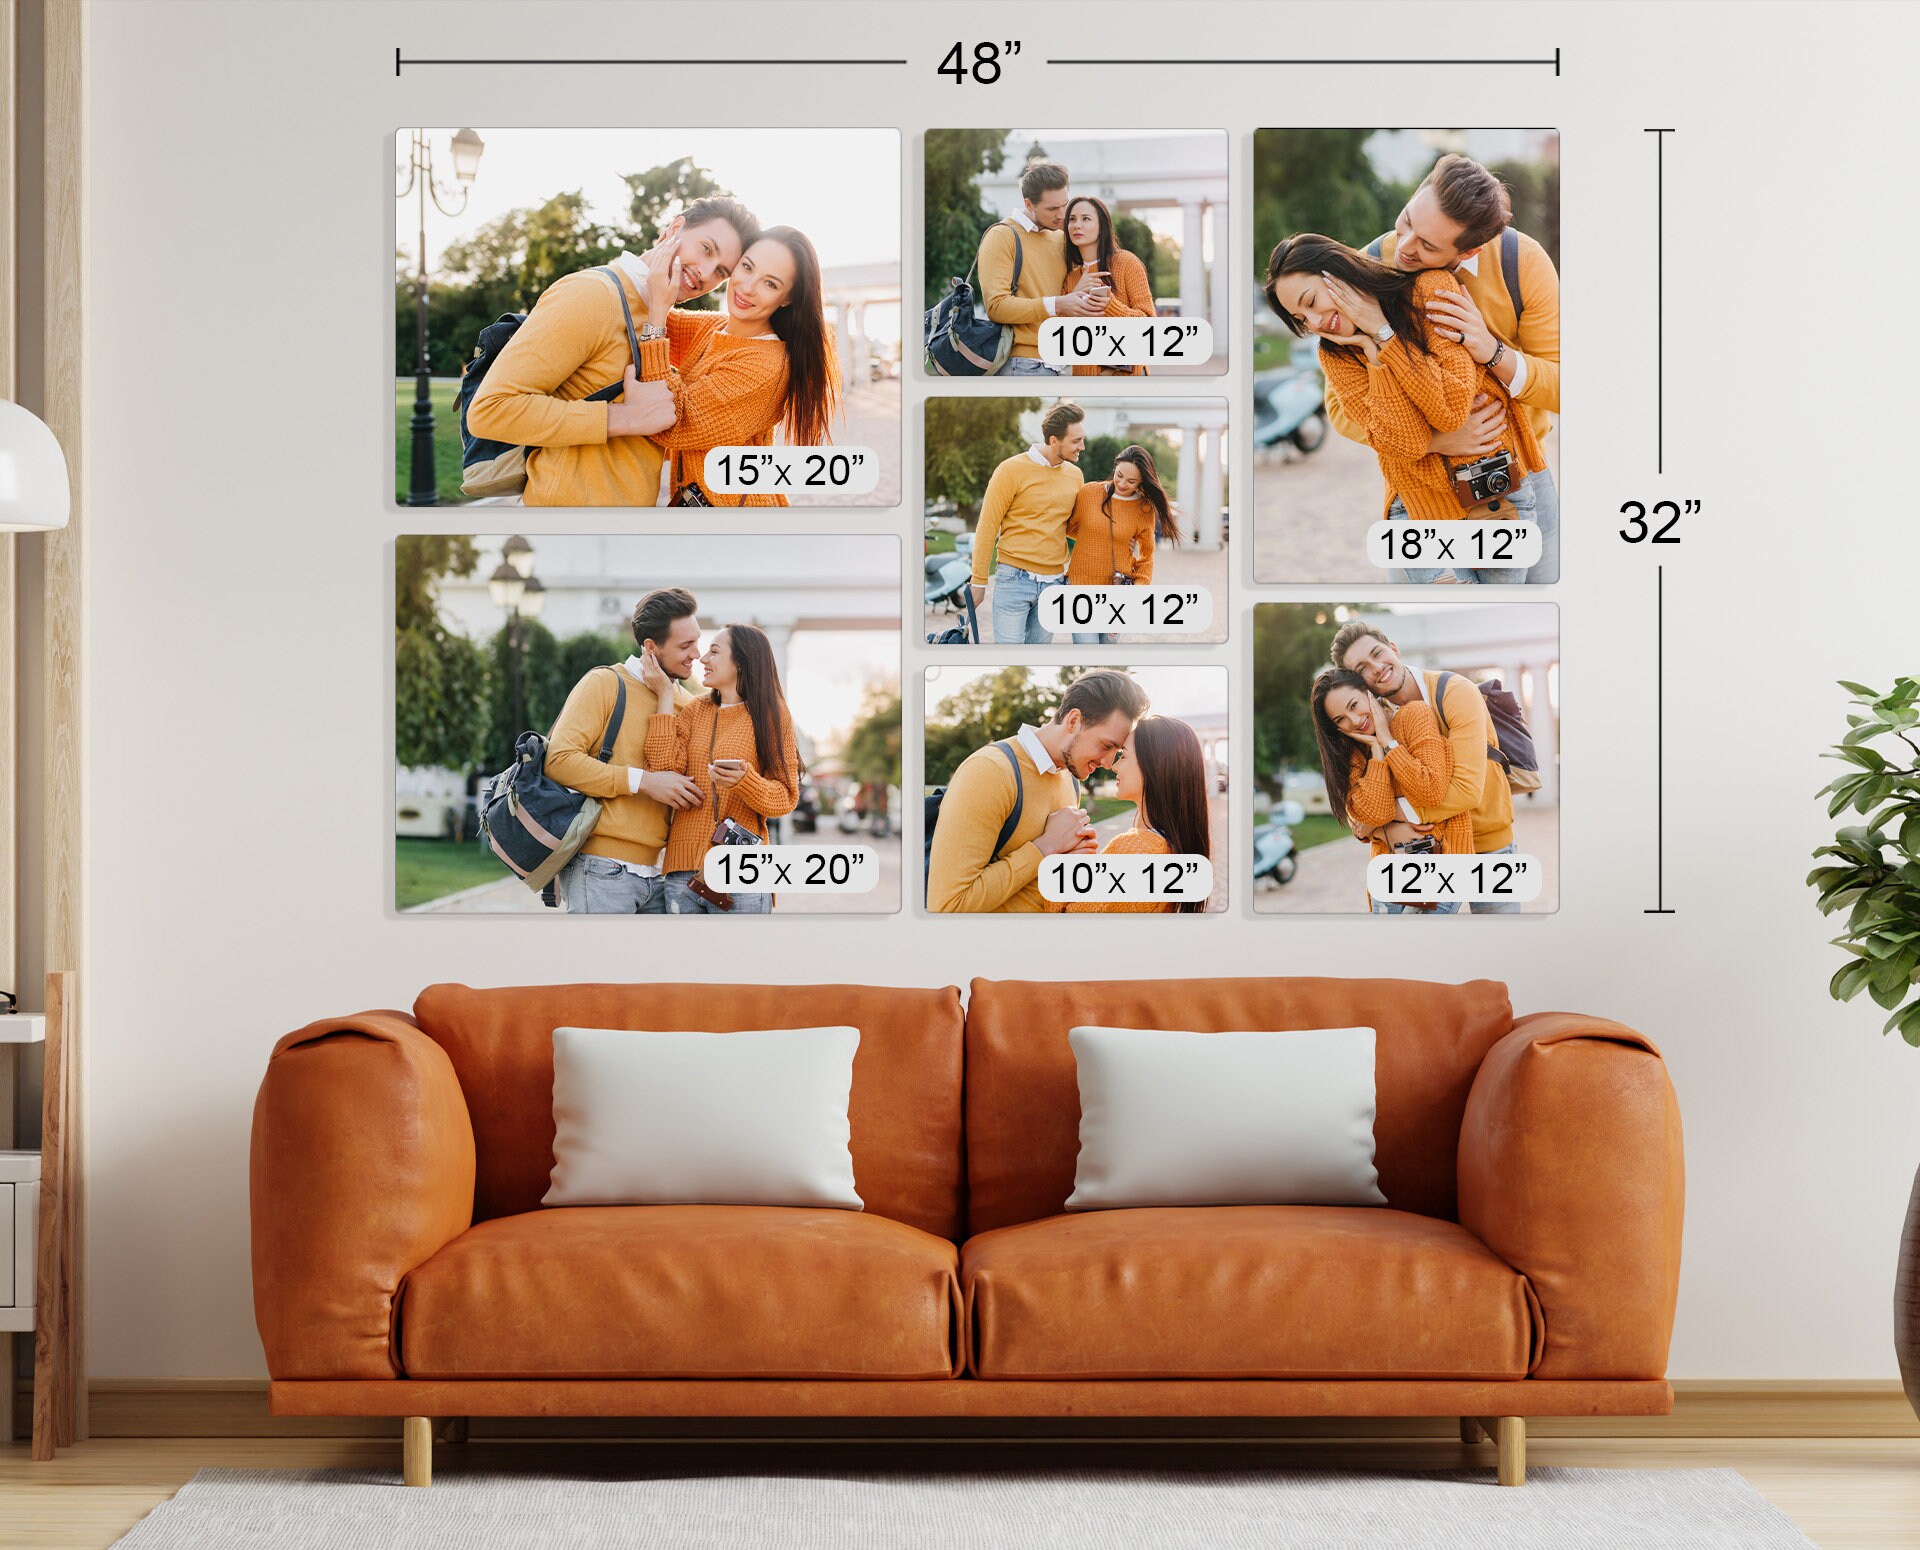 20 Canvas Print Ideas To Level Up Your Home Decor - Creative